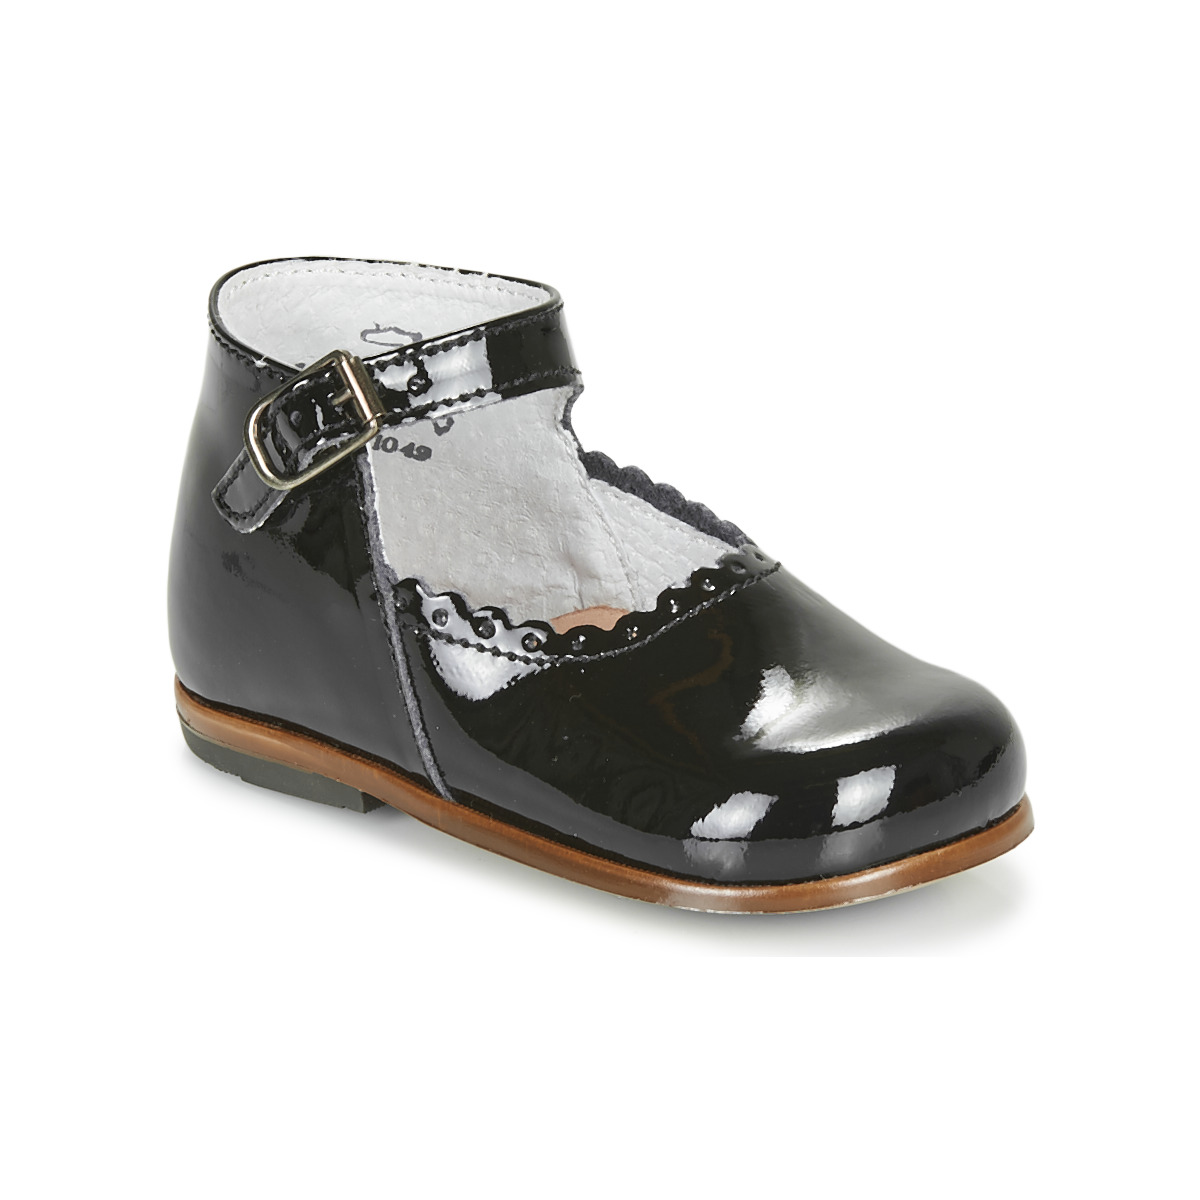 Shoes Girl Flat shoes Little Mary VOCALISE Black